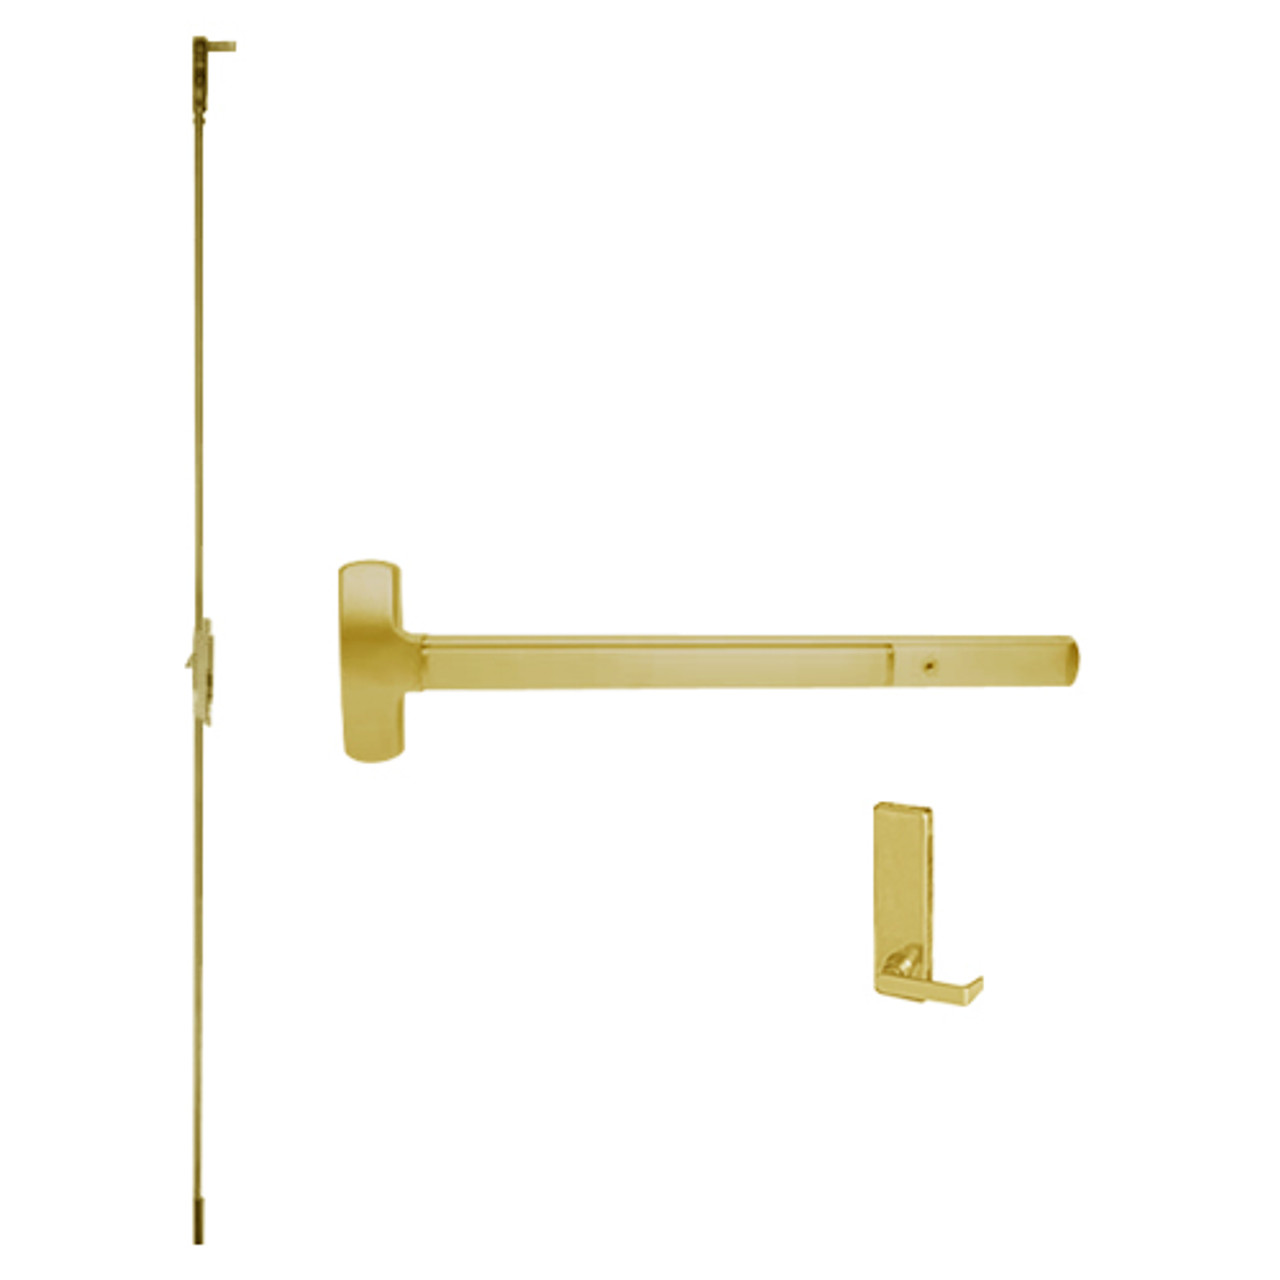 25-C-L-DT-DANE-US3-4-LHR Falcon Exit Device in Polished Brass